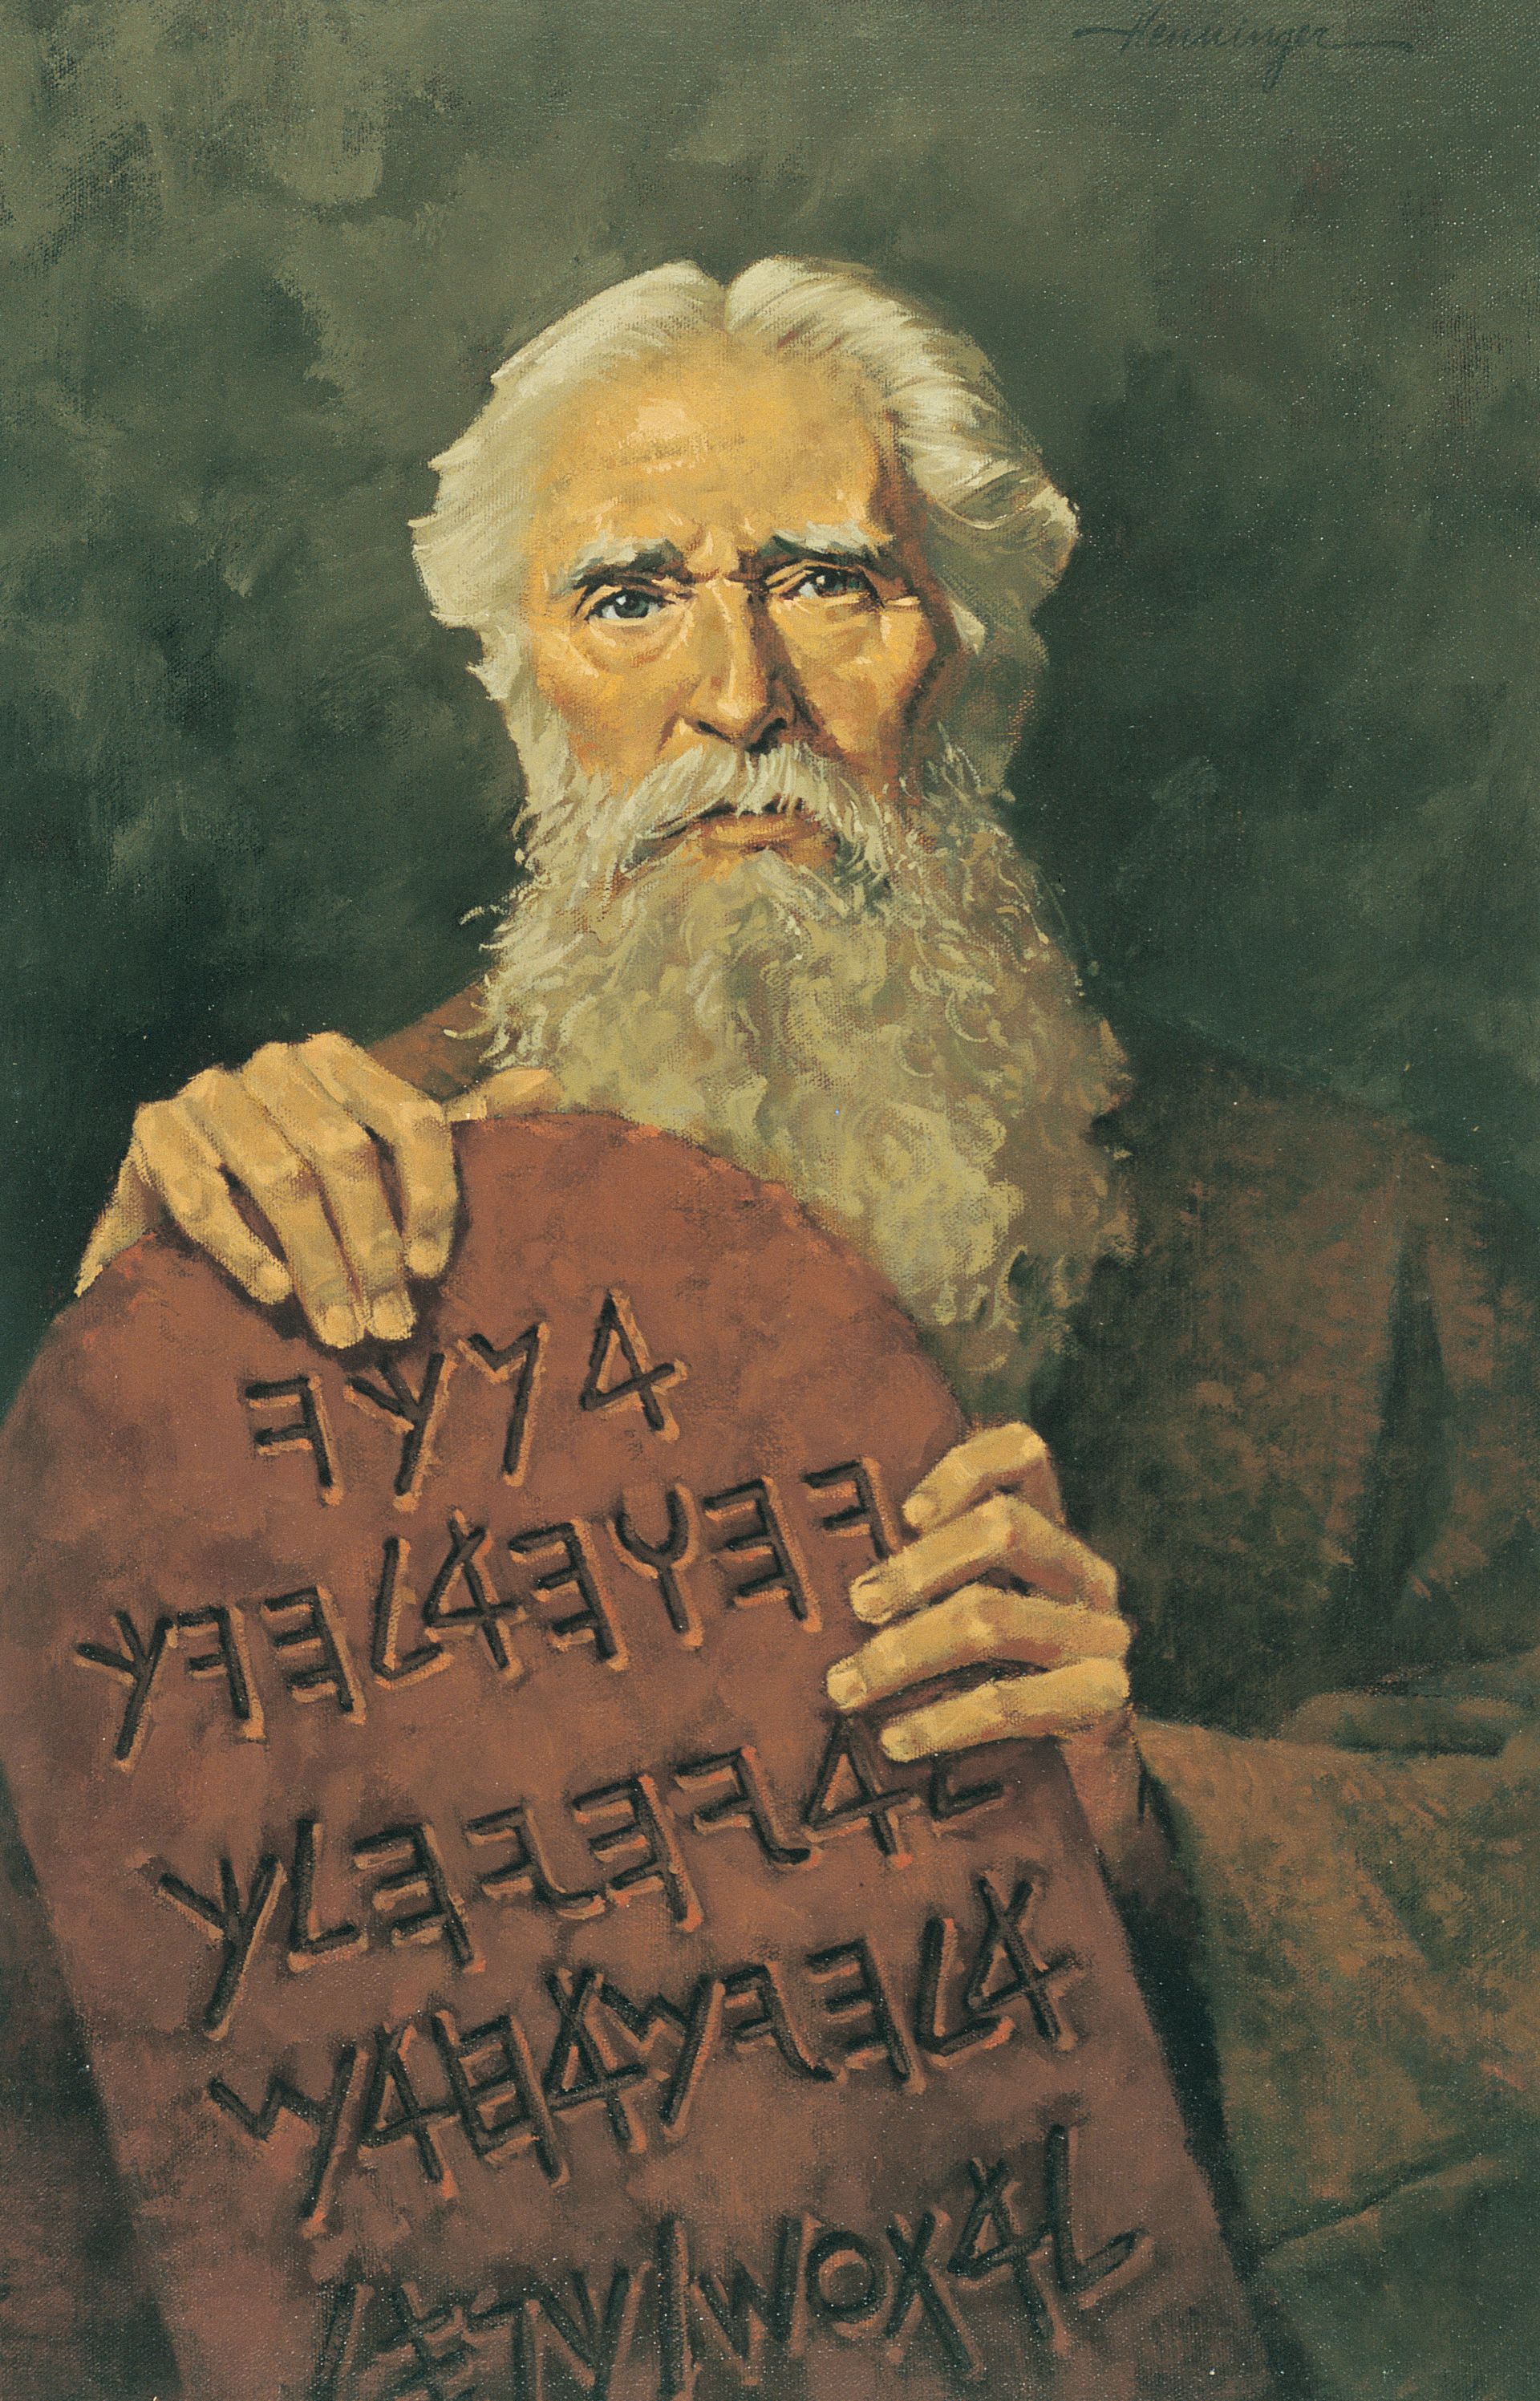 Moses the Lawgiver, by Ted Henninger